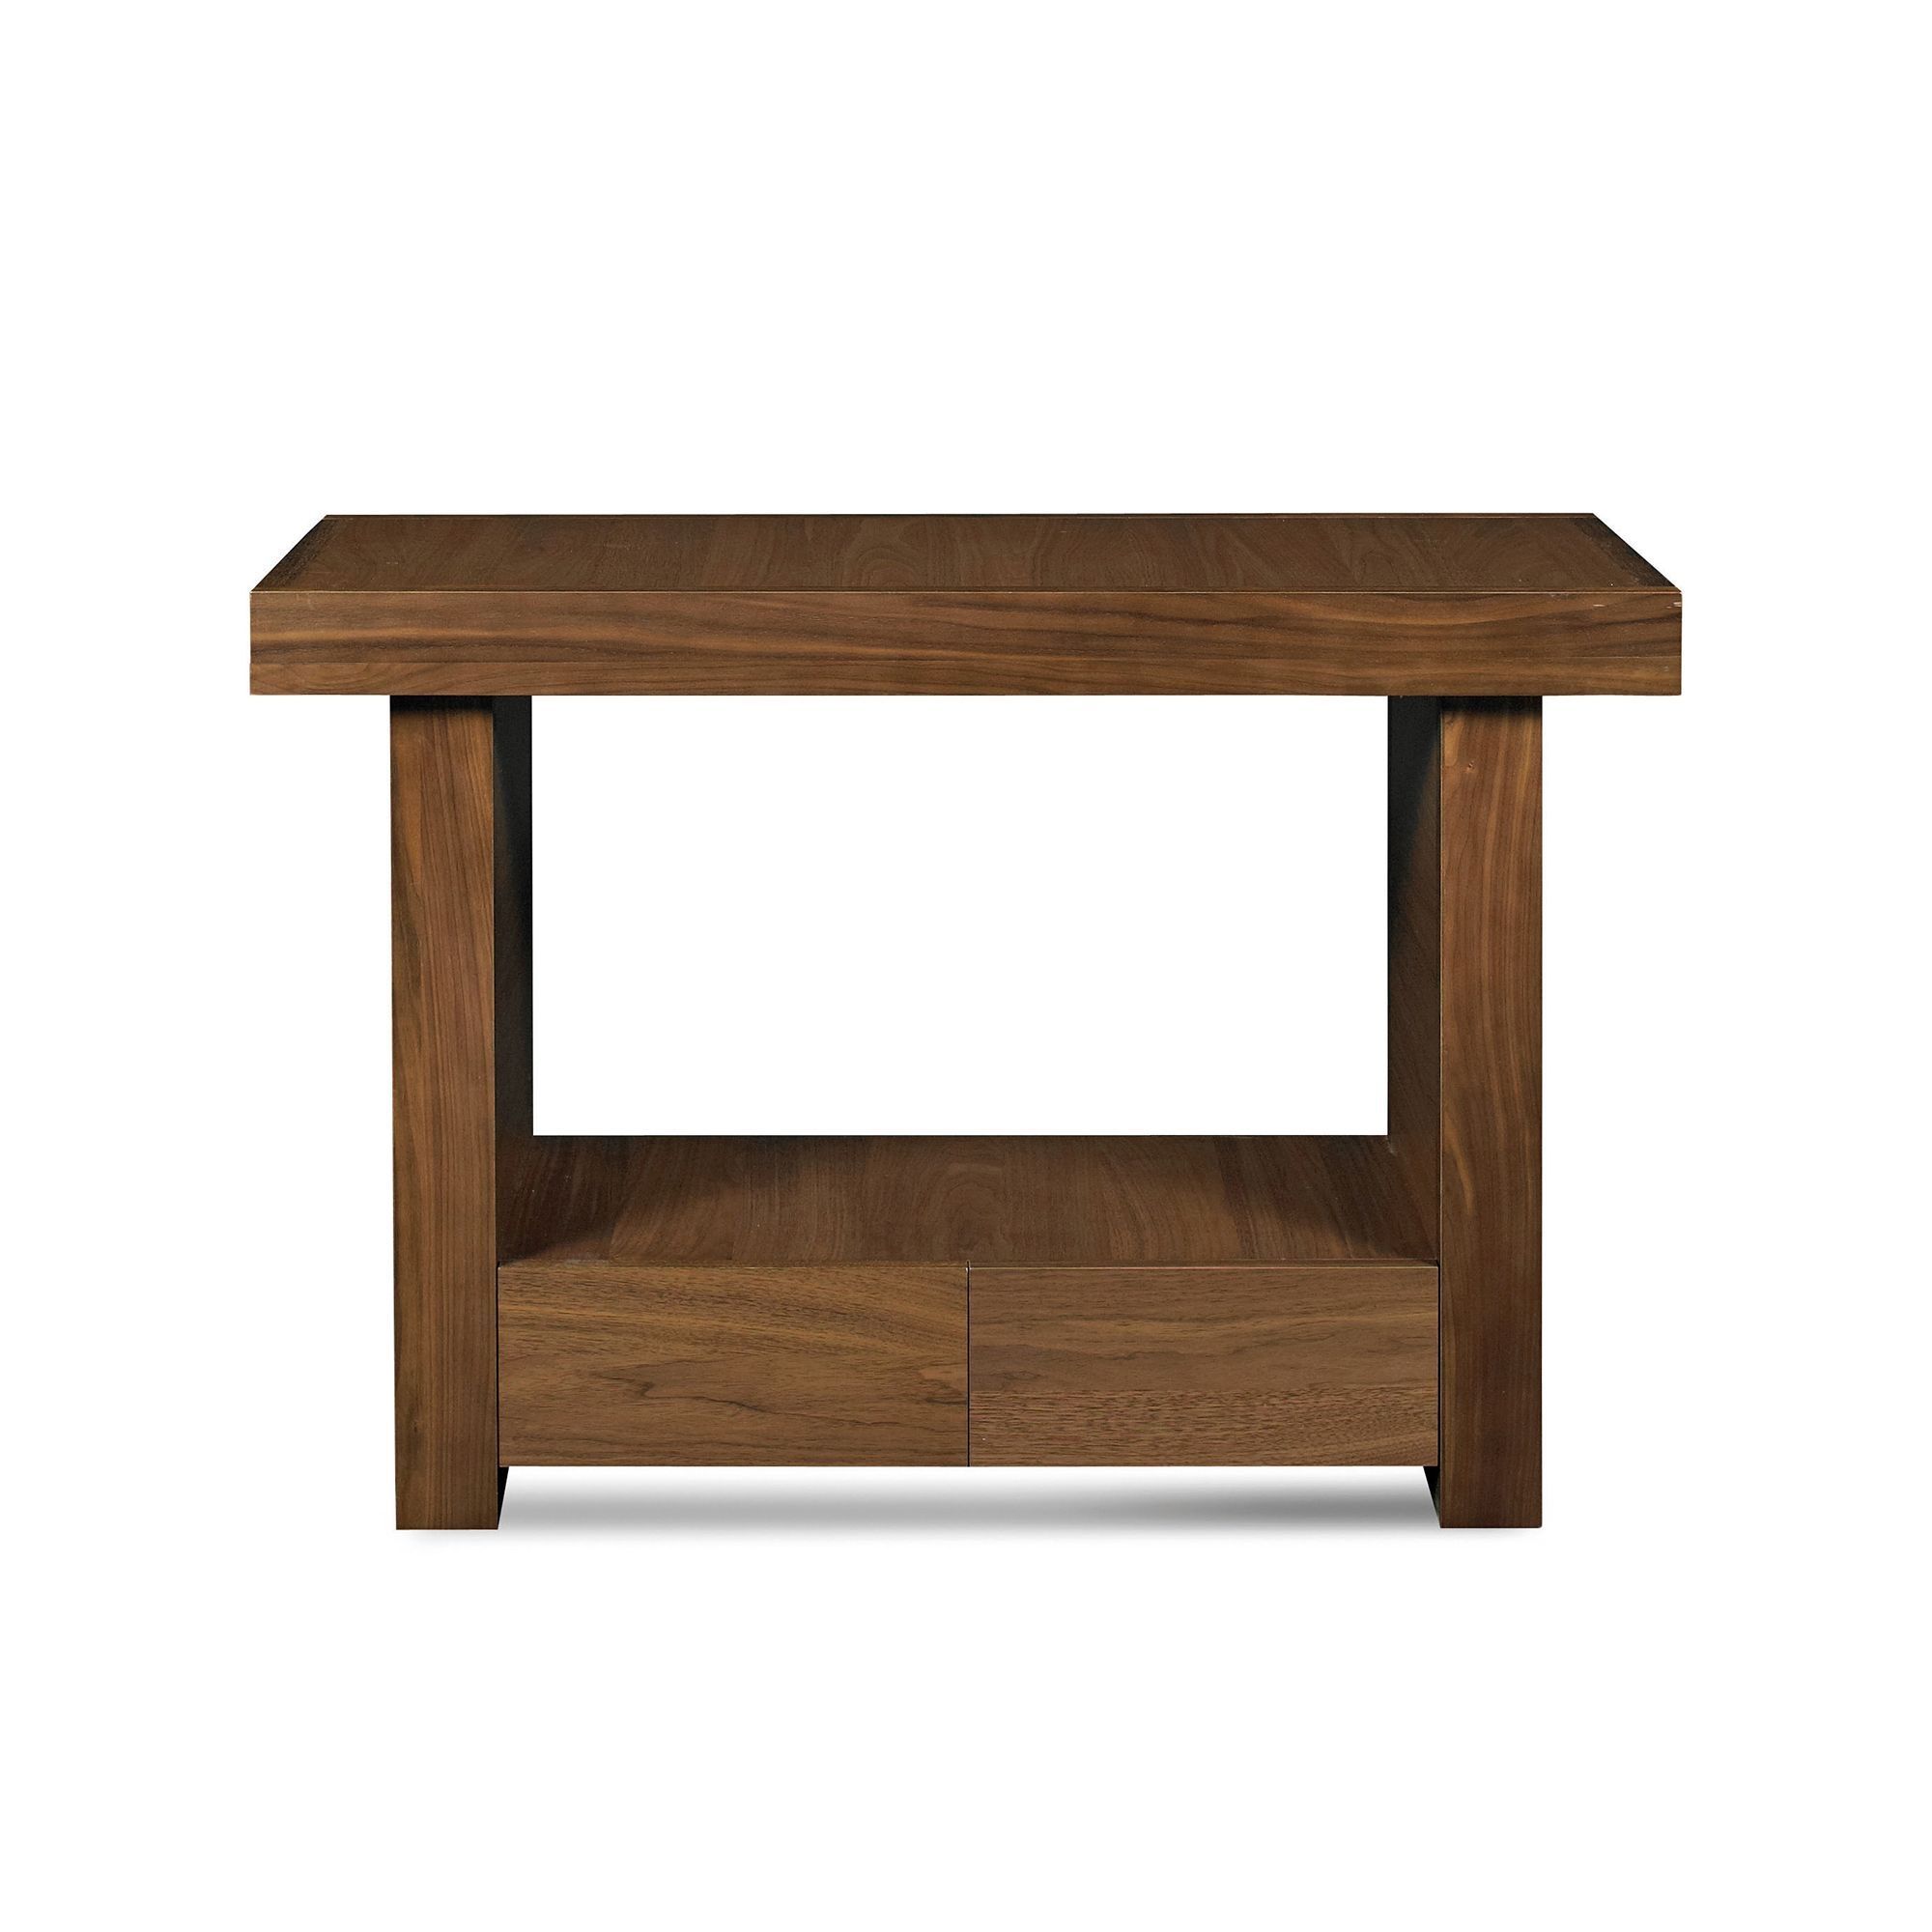 Akita | Bentley Designs | Walnut Console Table Regarding Hand Finished Walnut Console Tables (View 12 of 20)